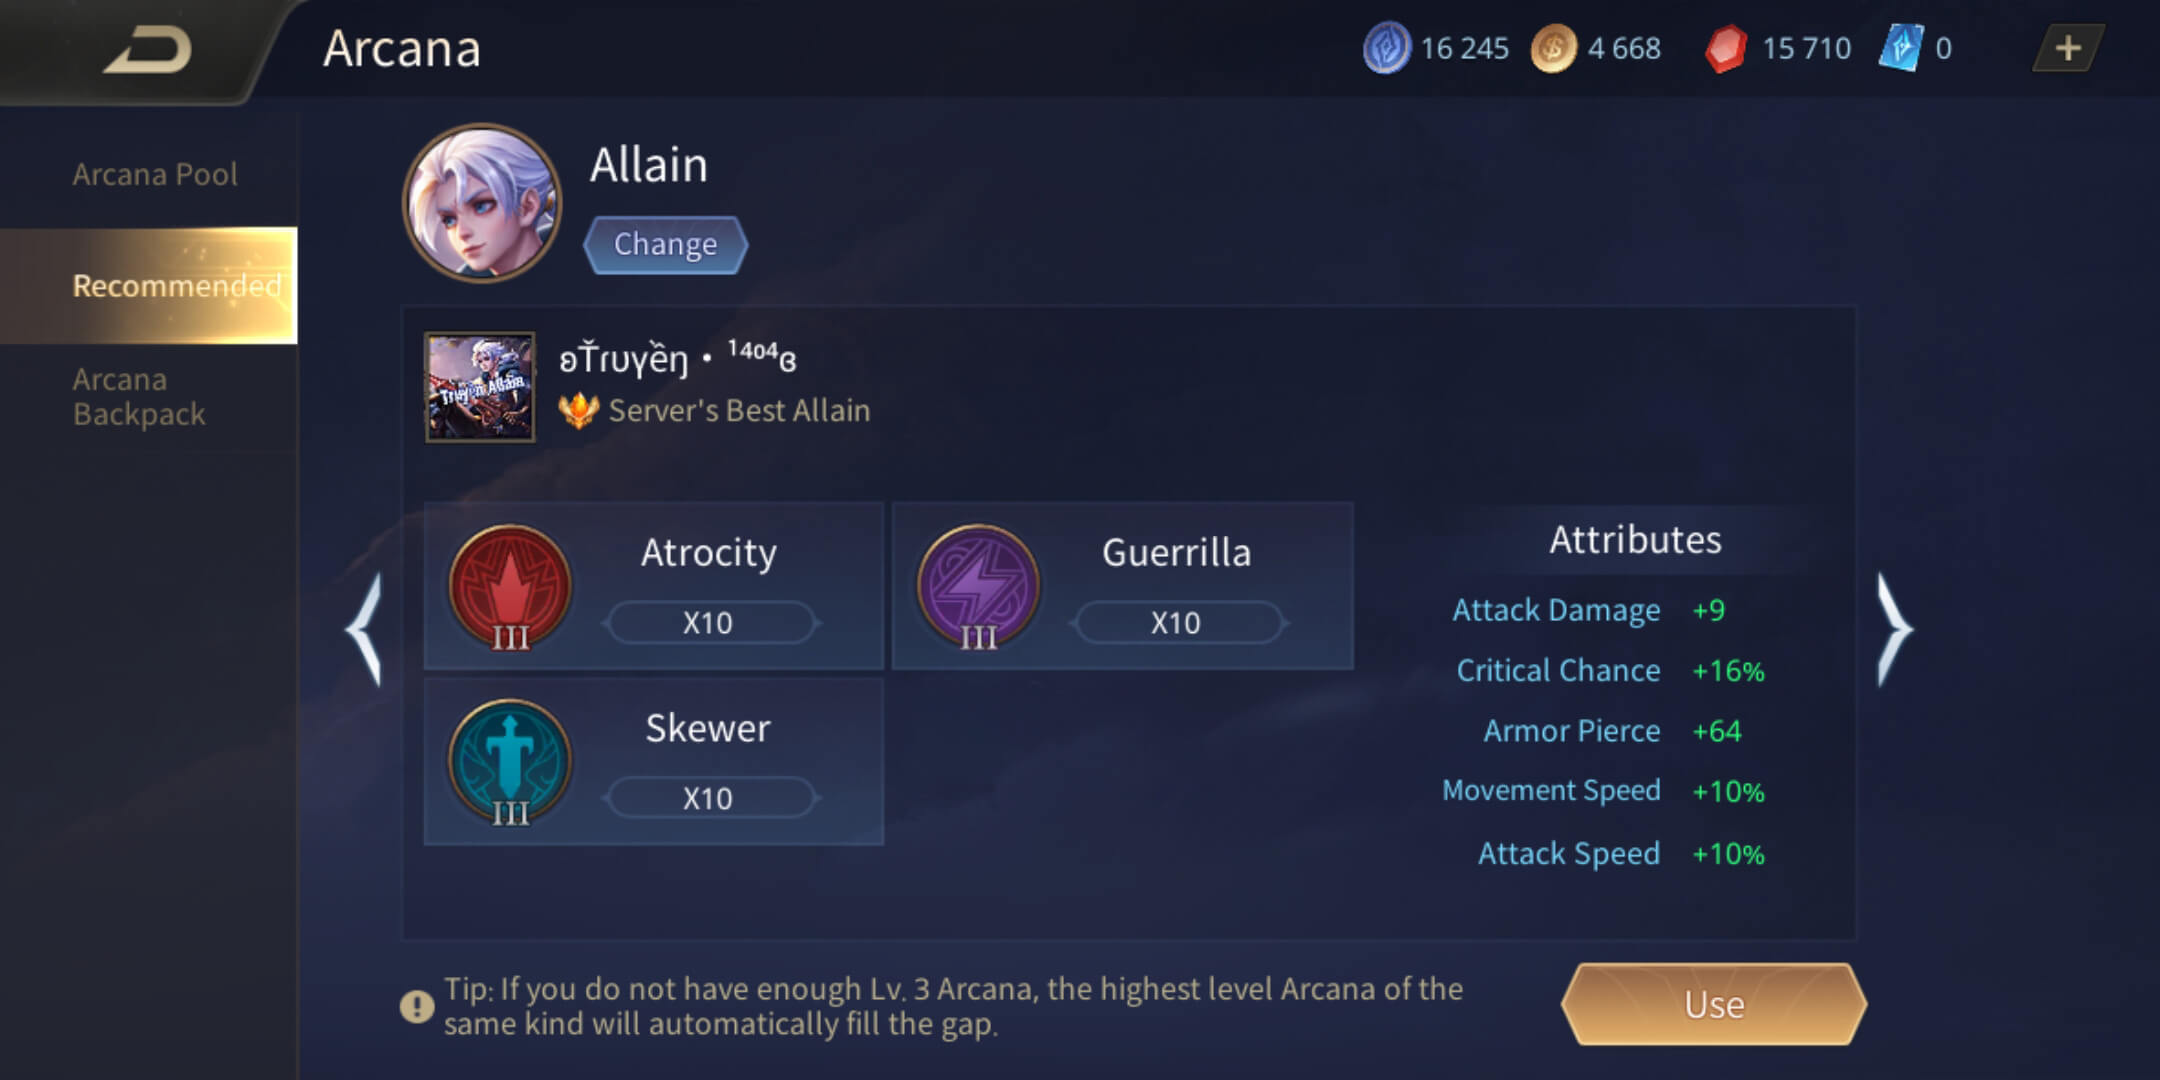 Allain Arcana Recommended